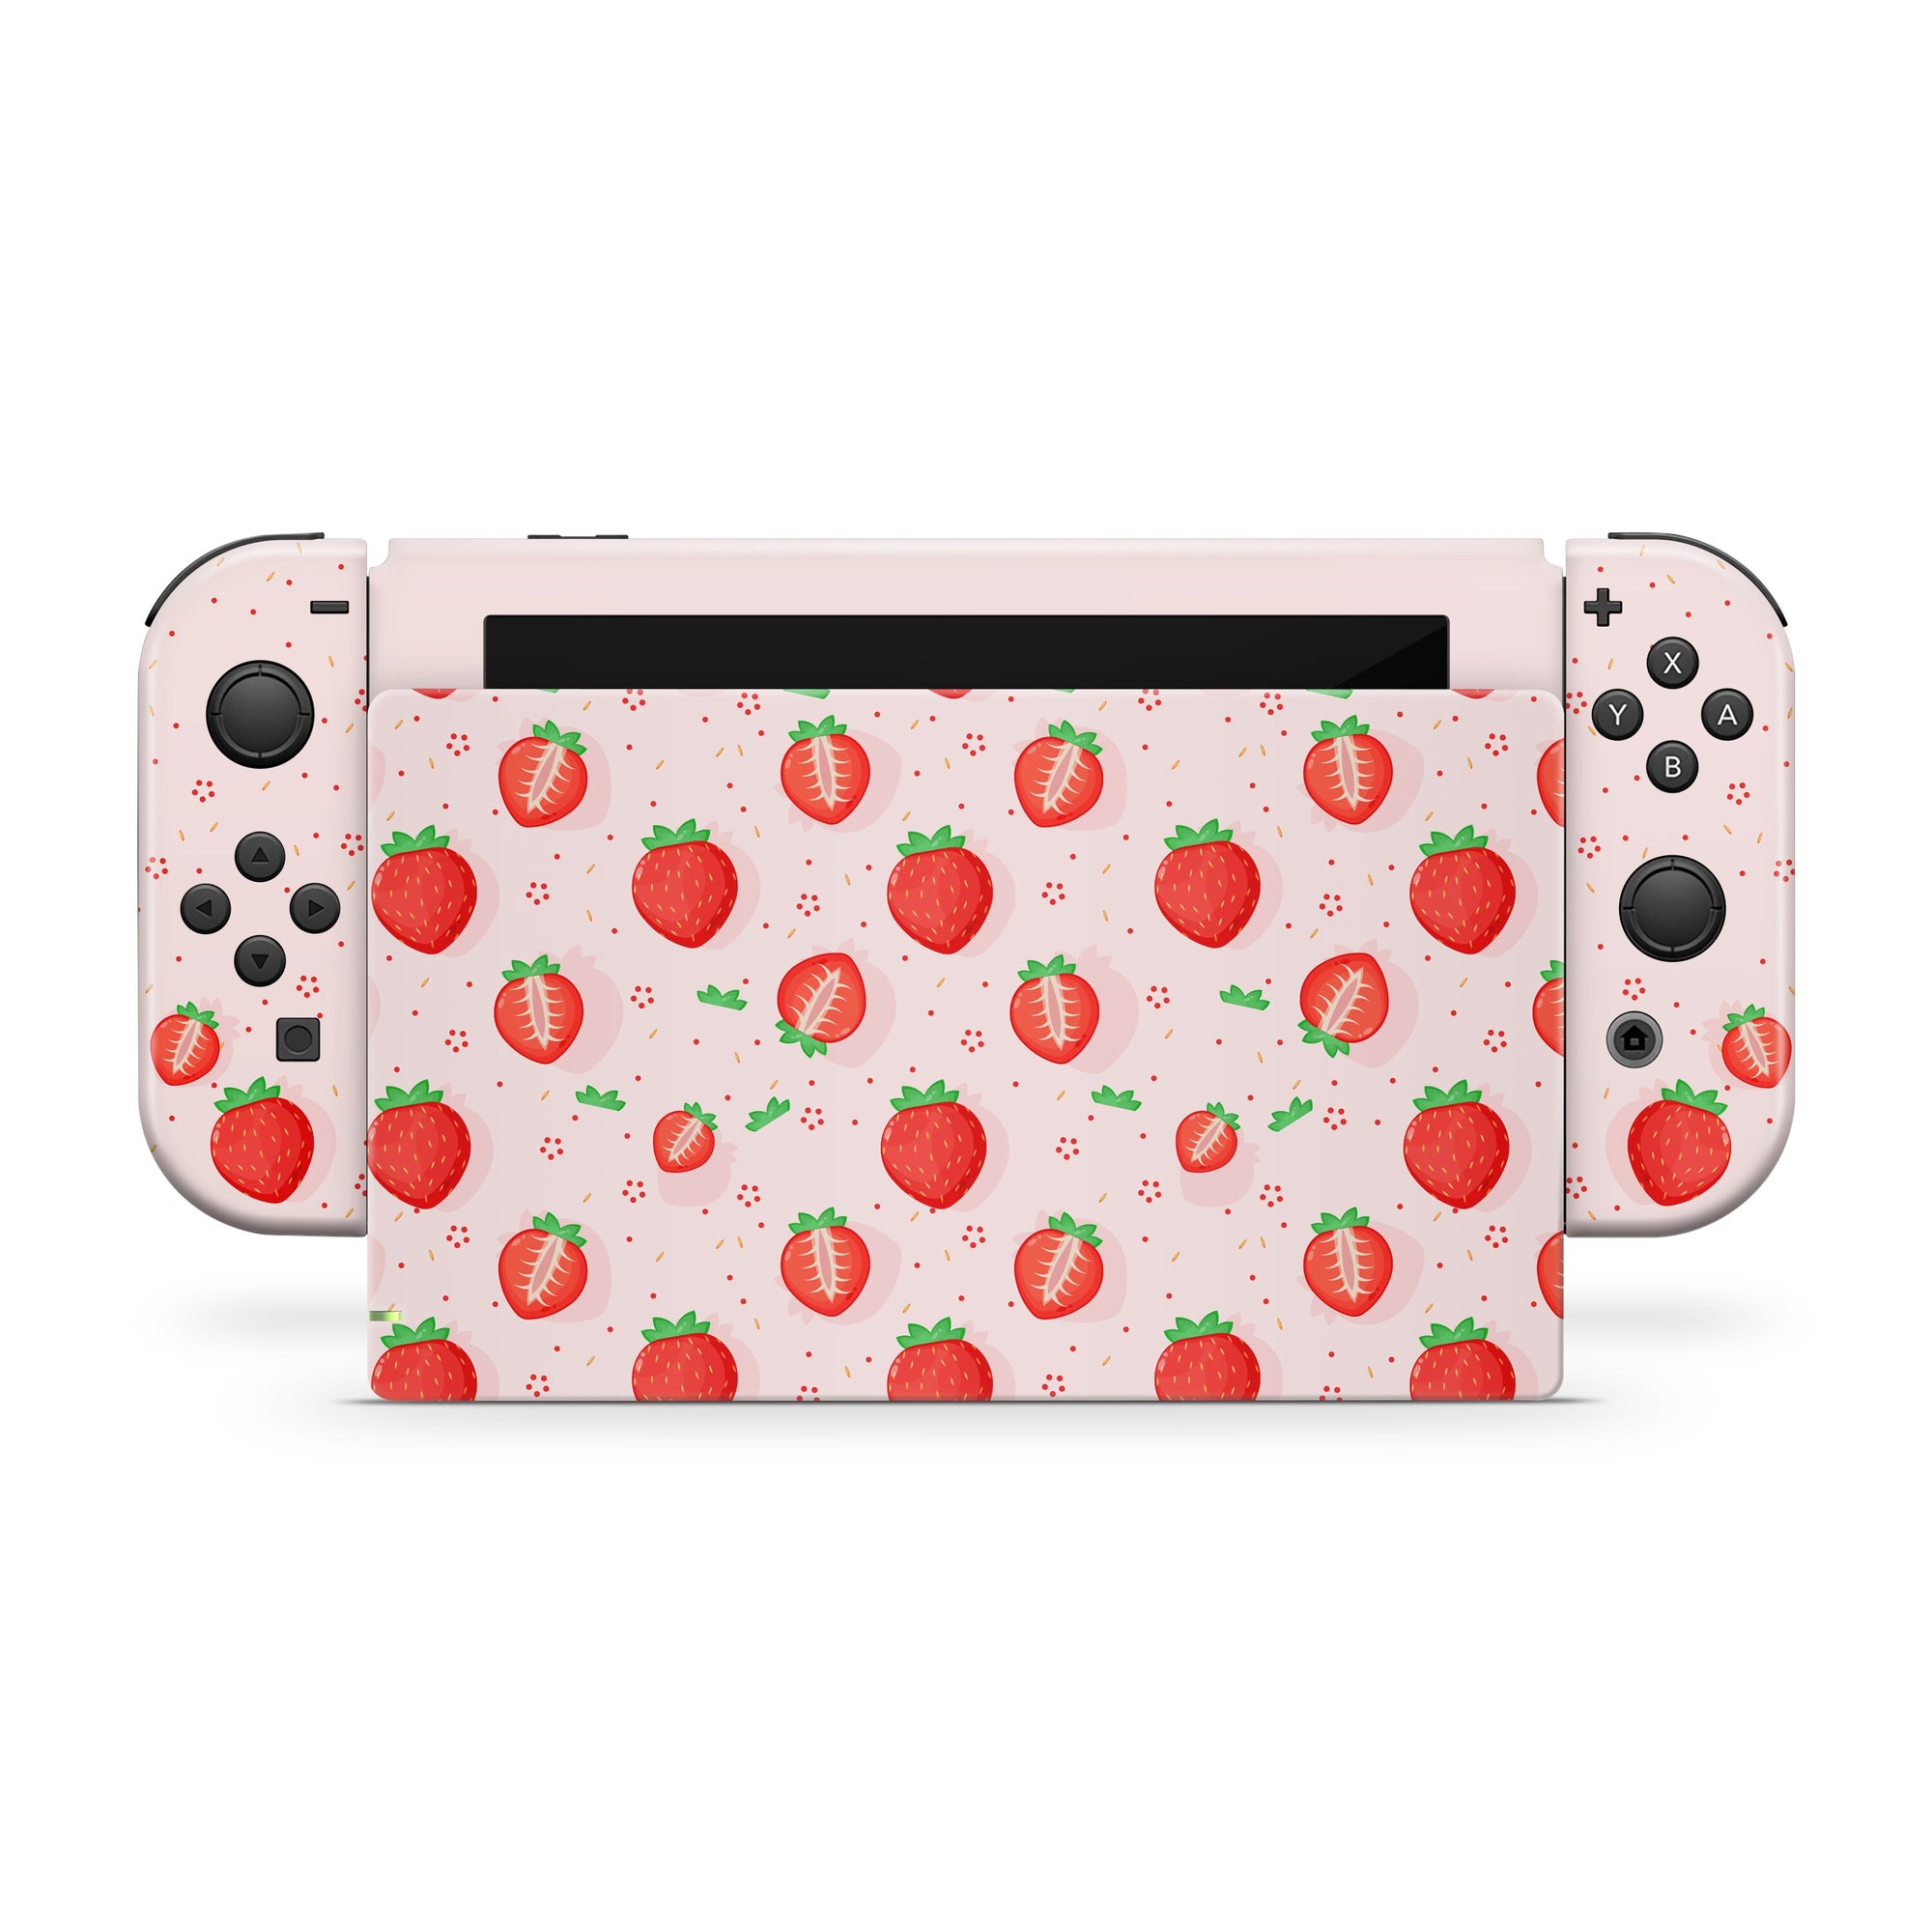 Kawaii strawberry nintendo switches skin ,Pink switch skin vinyl 3m Decal sticker Full wrap cover